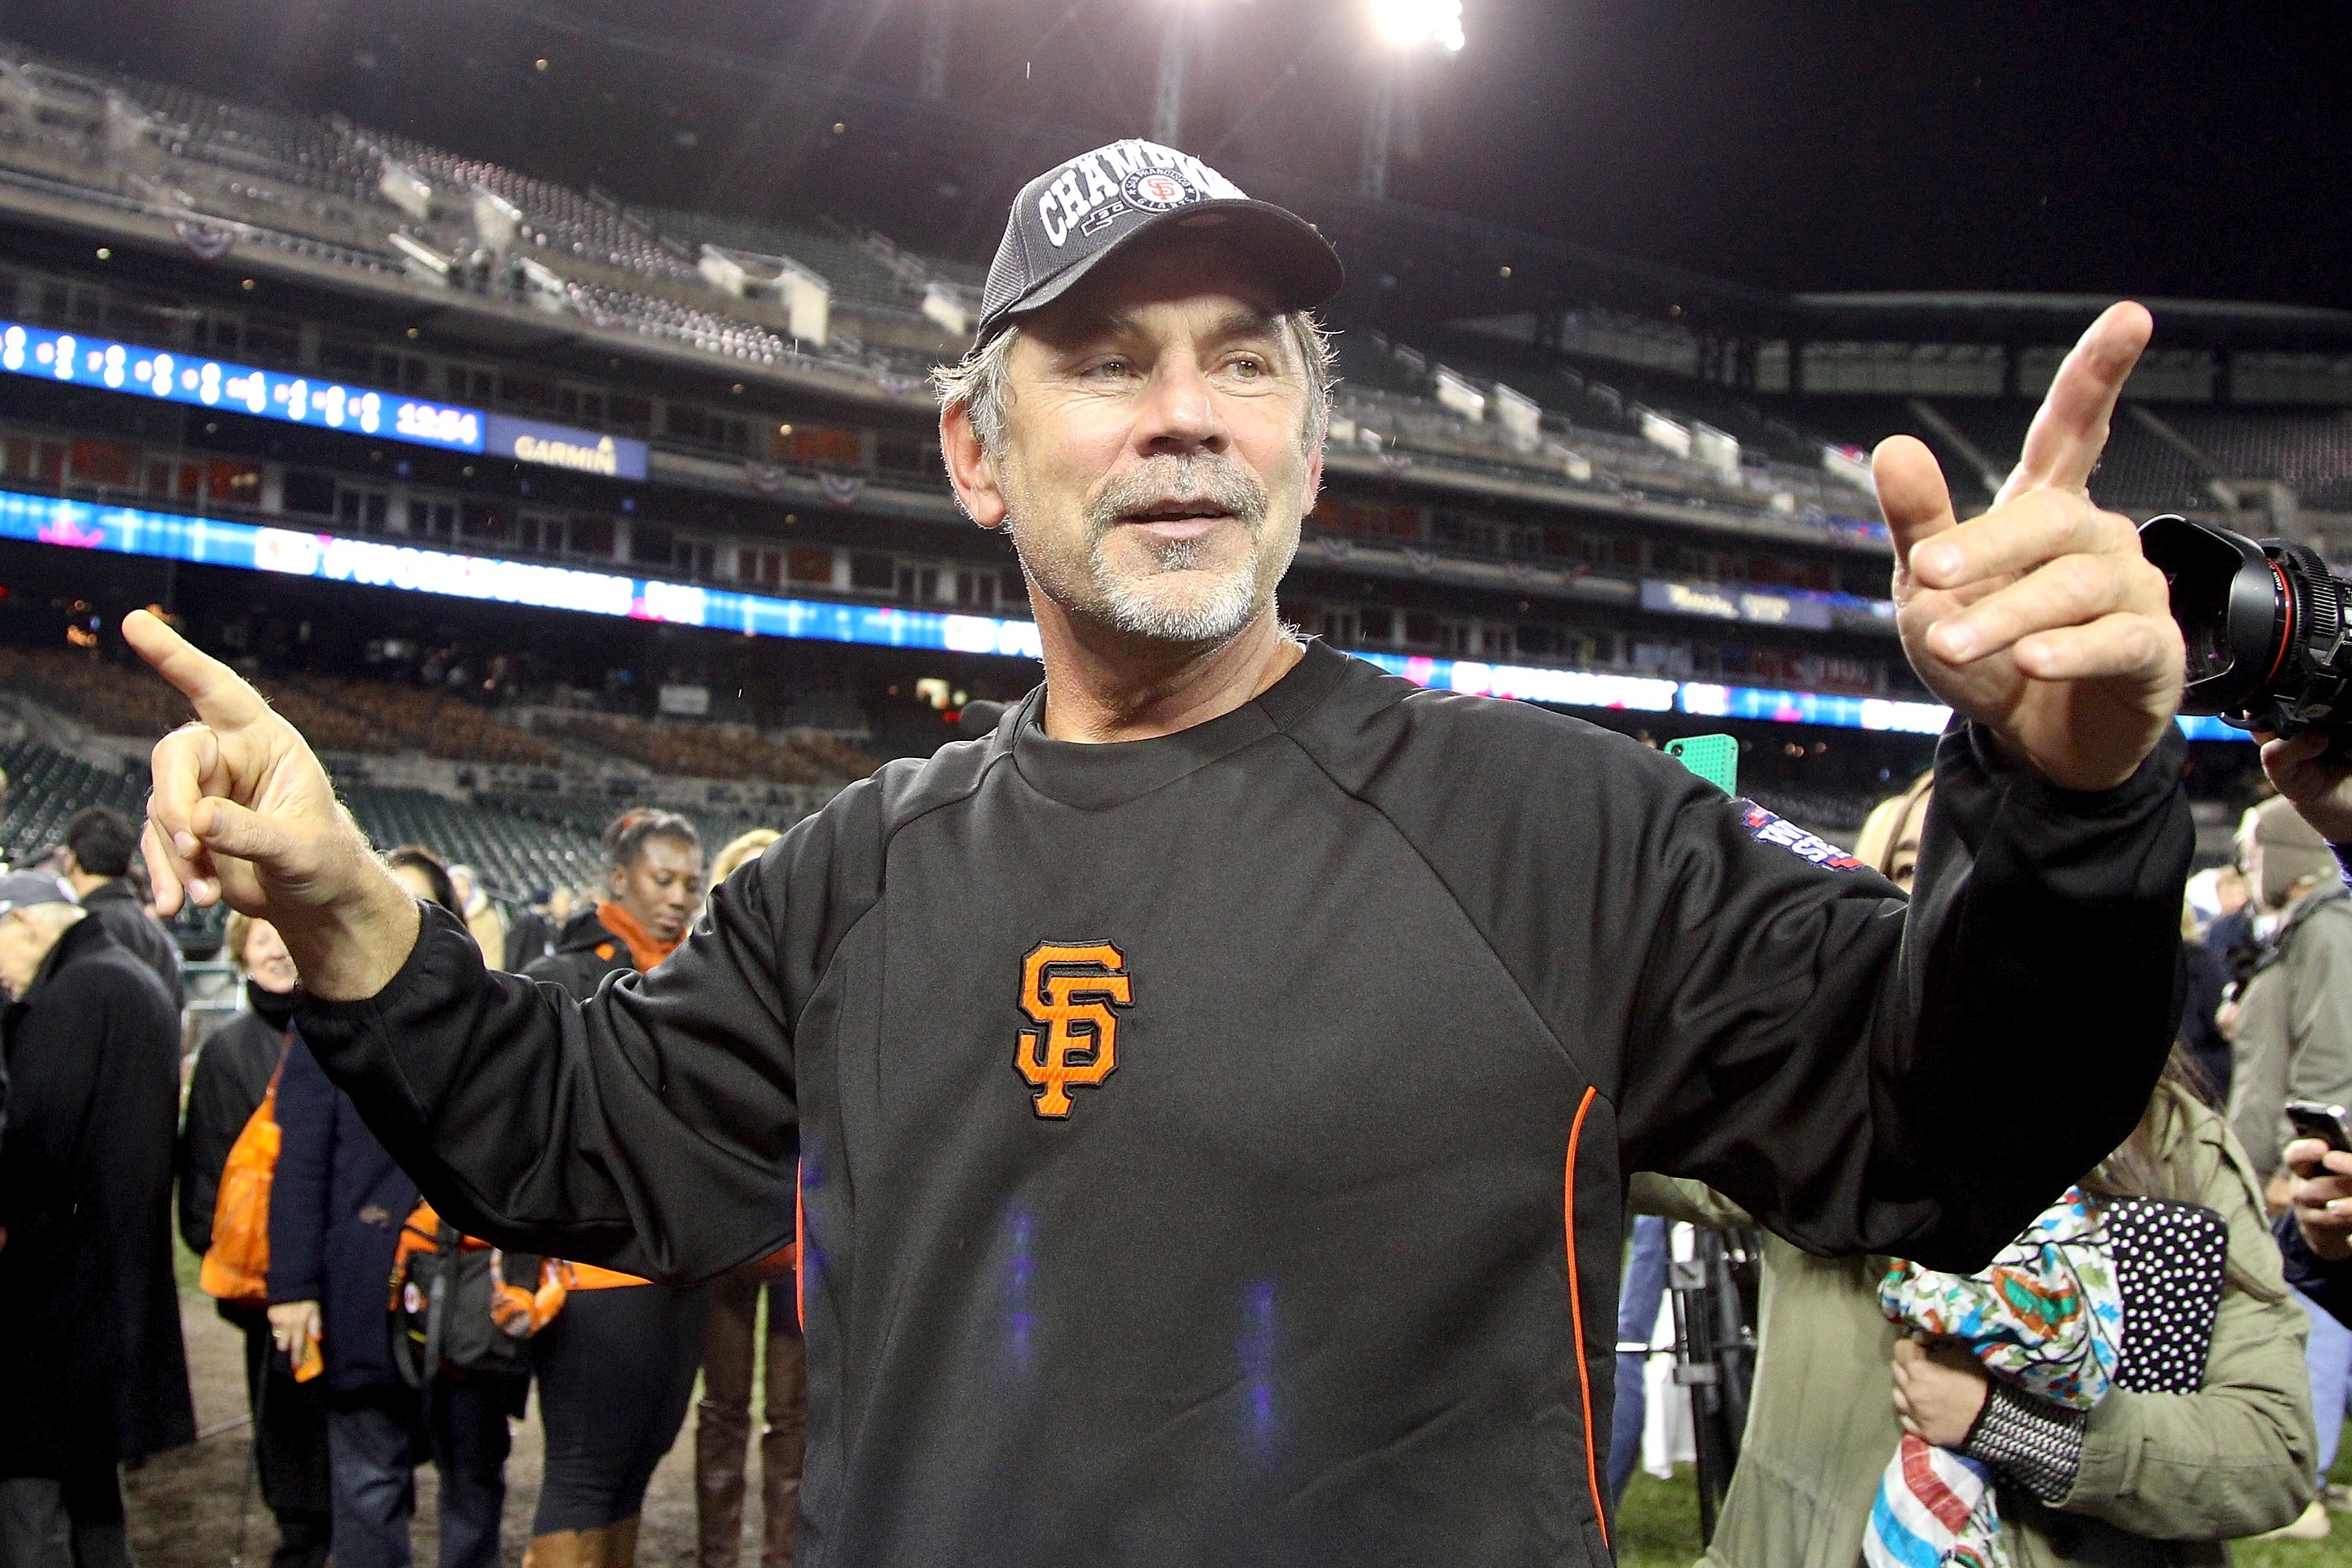 Fun times': World Series champion manager Bruce Bochy reminisces